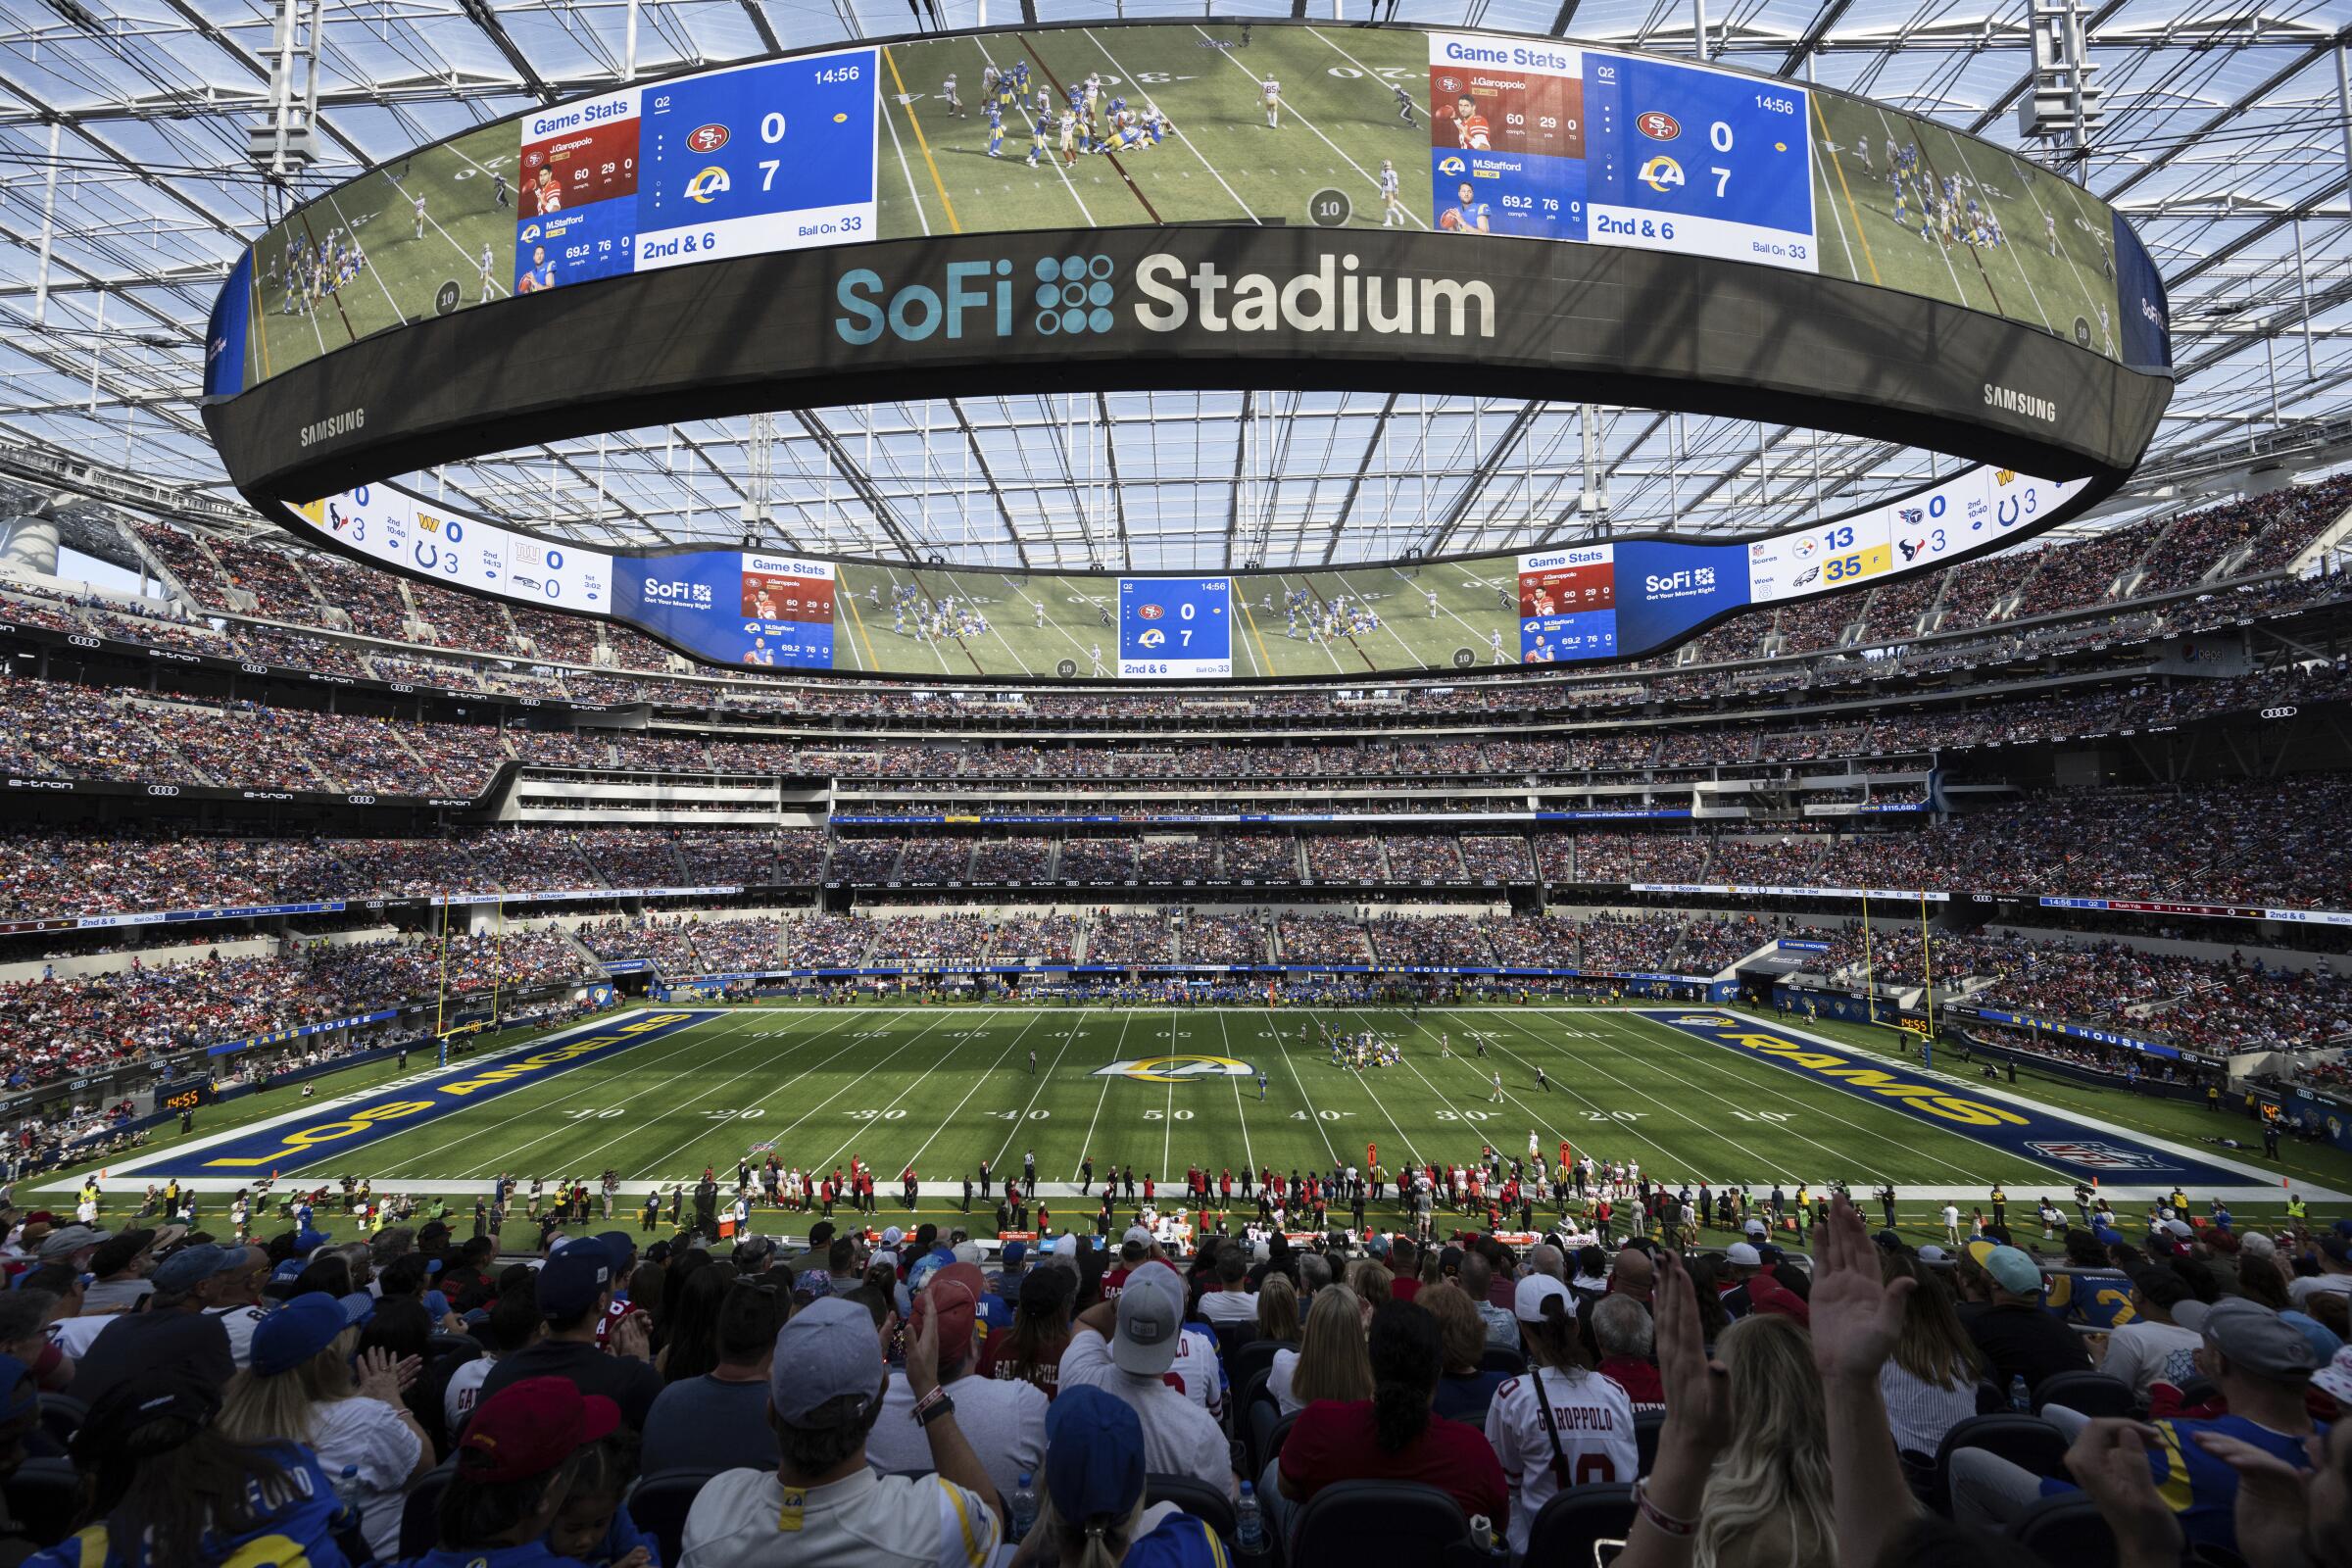 A general overall view of SoFi Stadium during an NFL football game between the Los Angeles Rams.